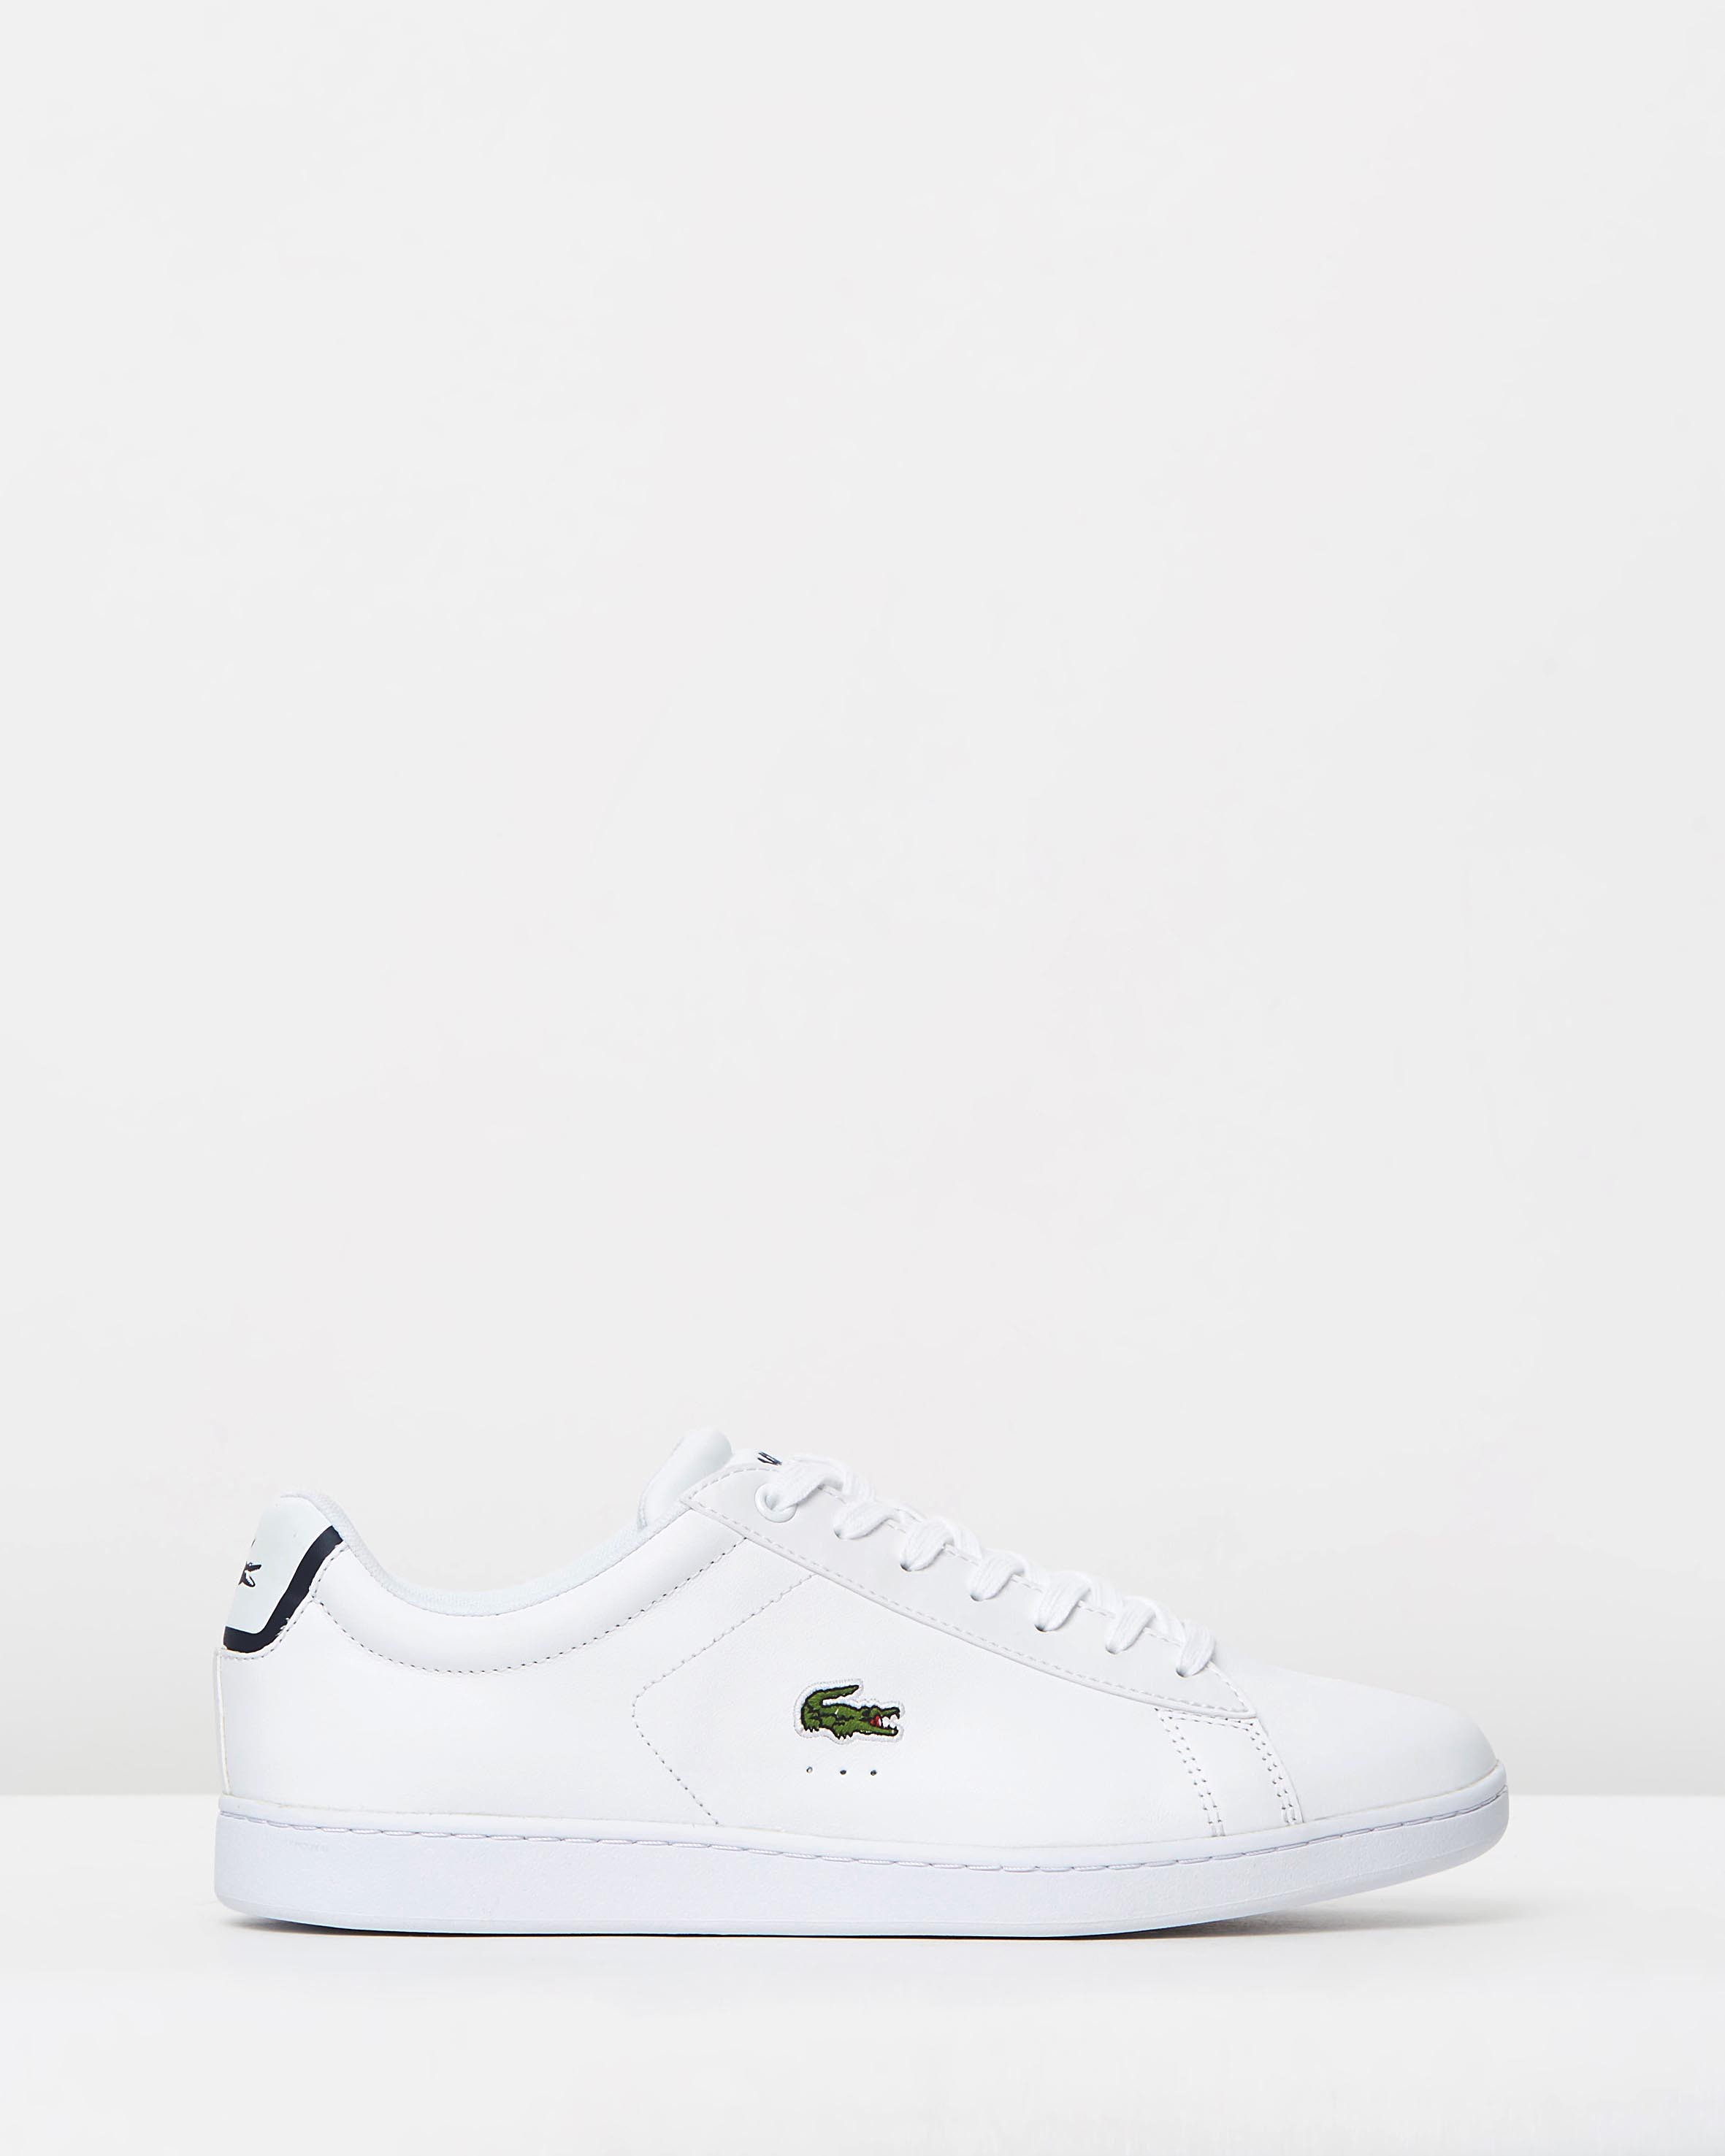 Carnaby BL 1 - Men's White/Black by ShoeSales